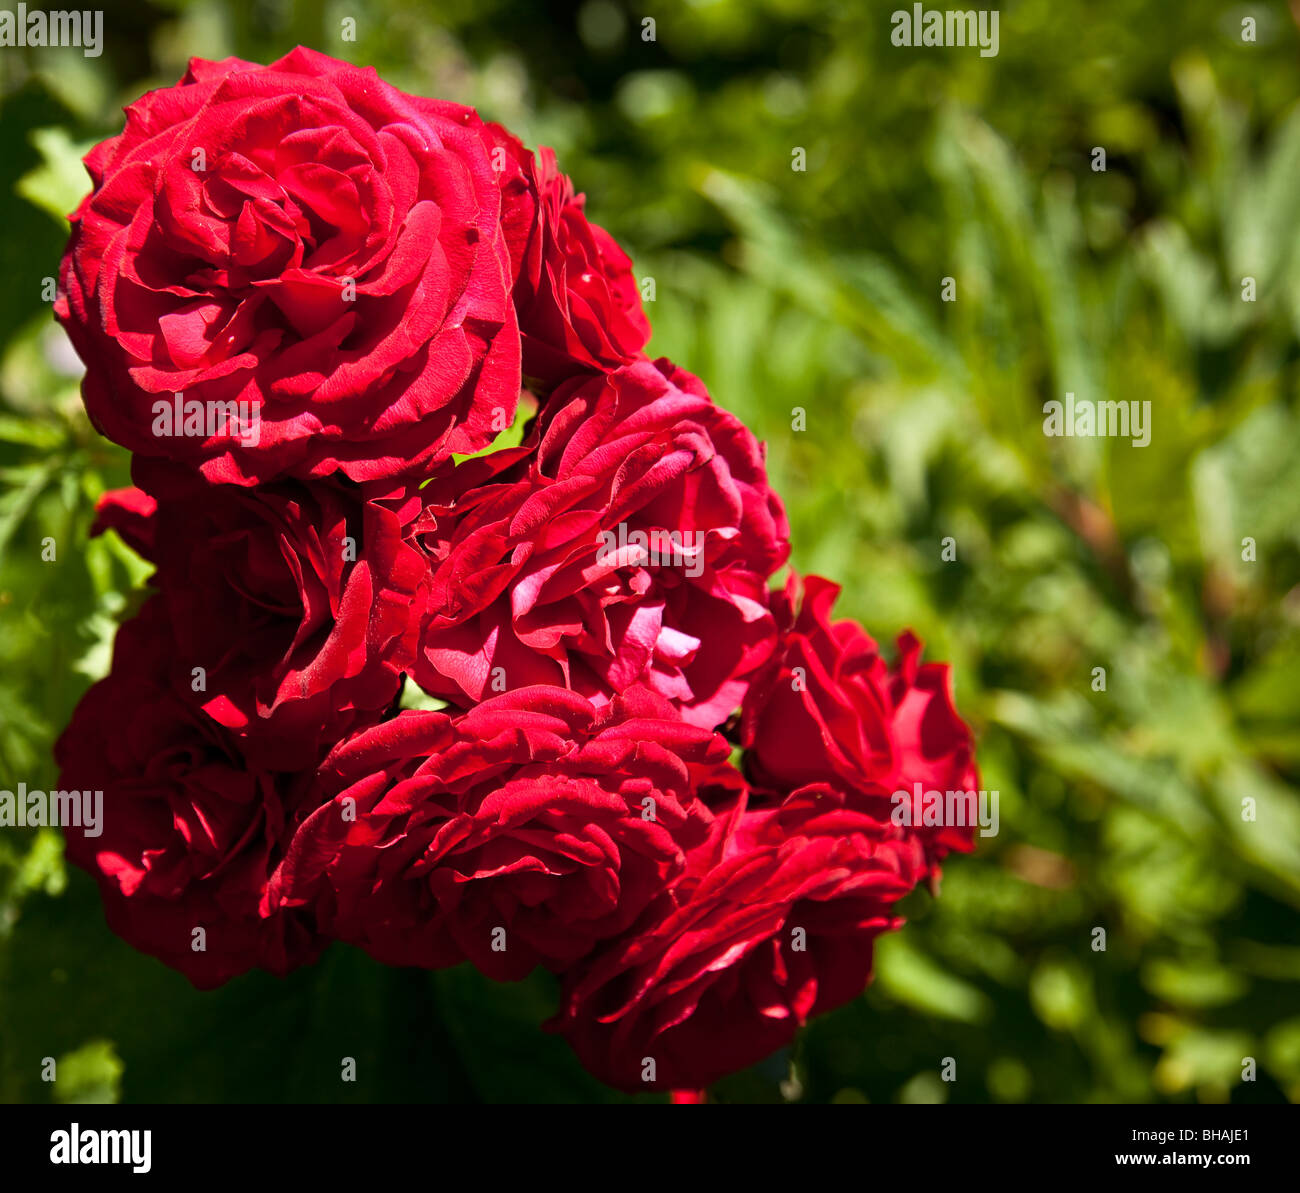 Beautiful single white flower surrounded by other flowers Stock Photo